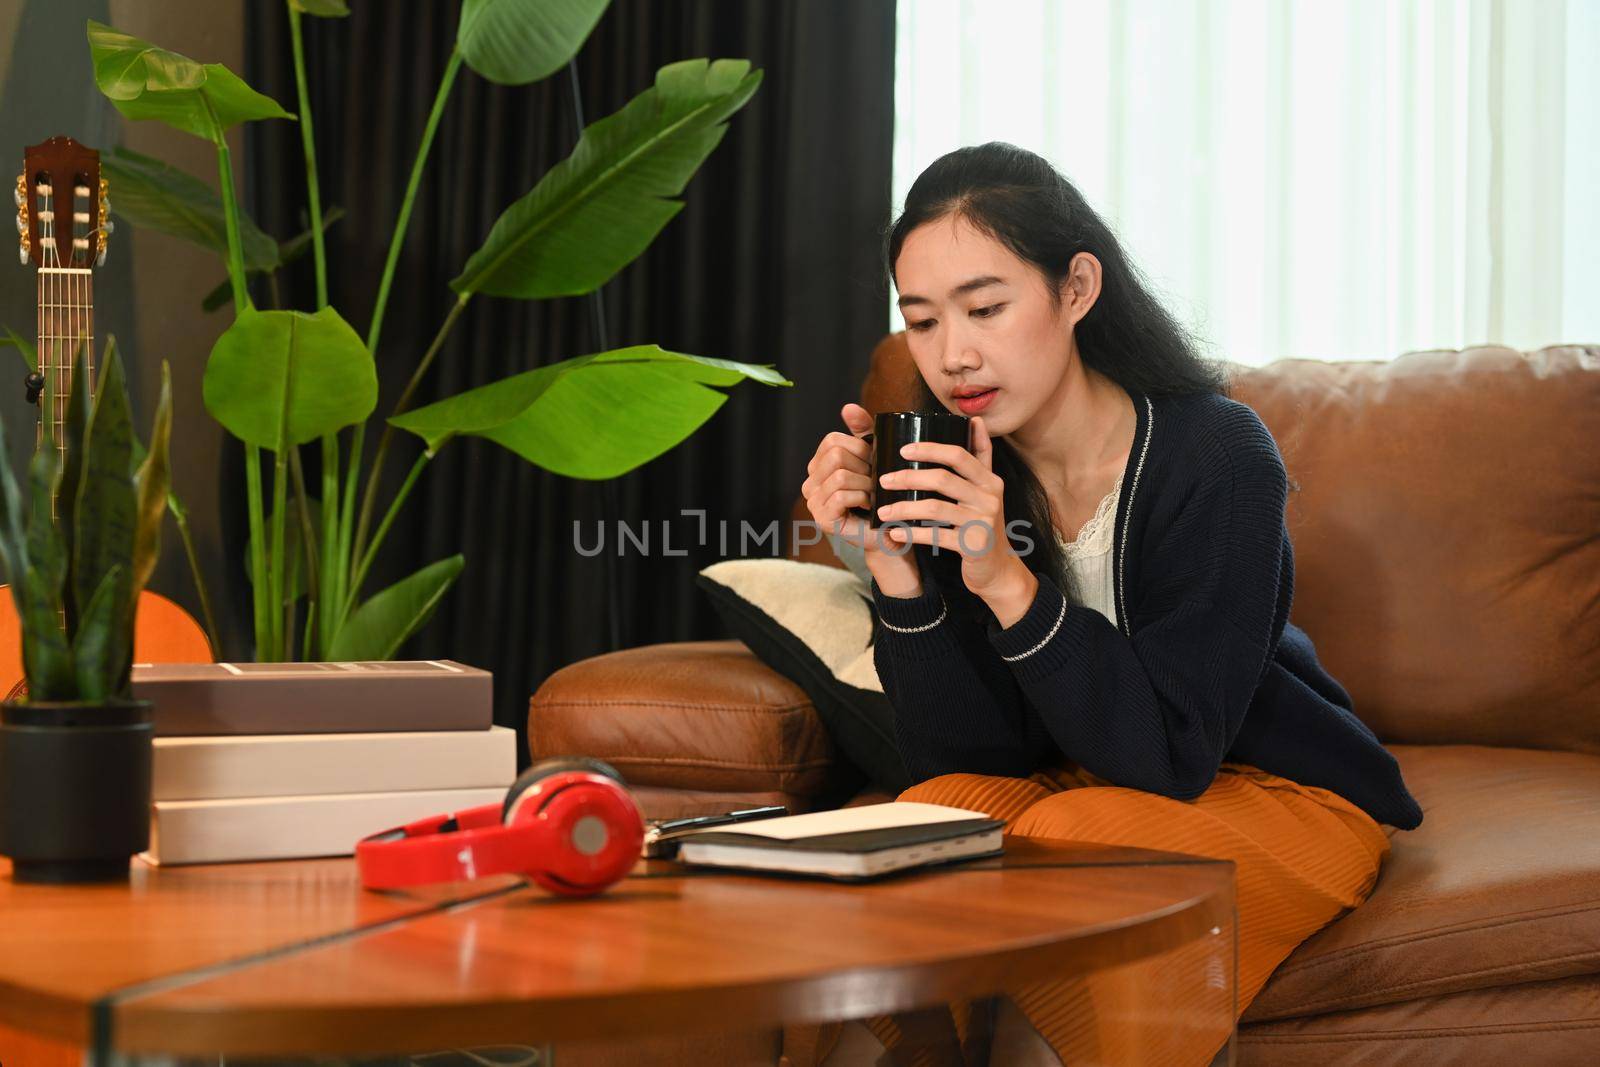 Pleasant young woman drinking hot coffee and relaxing on couch, enjoying stress free peaceful mood in an autumn day.